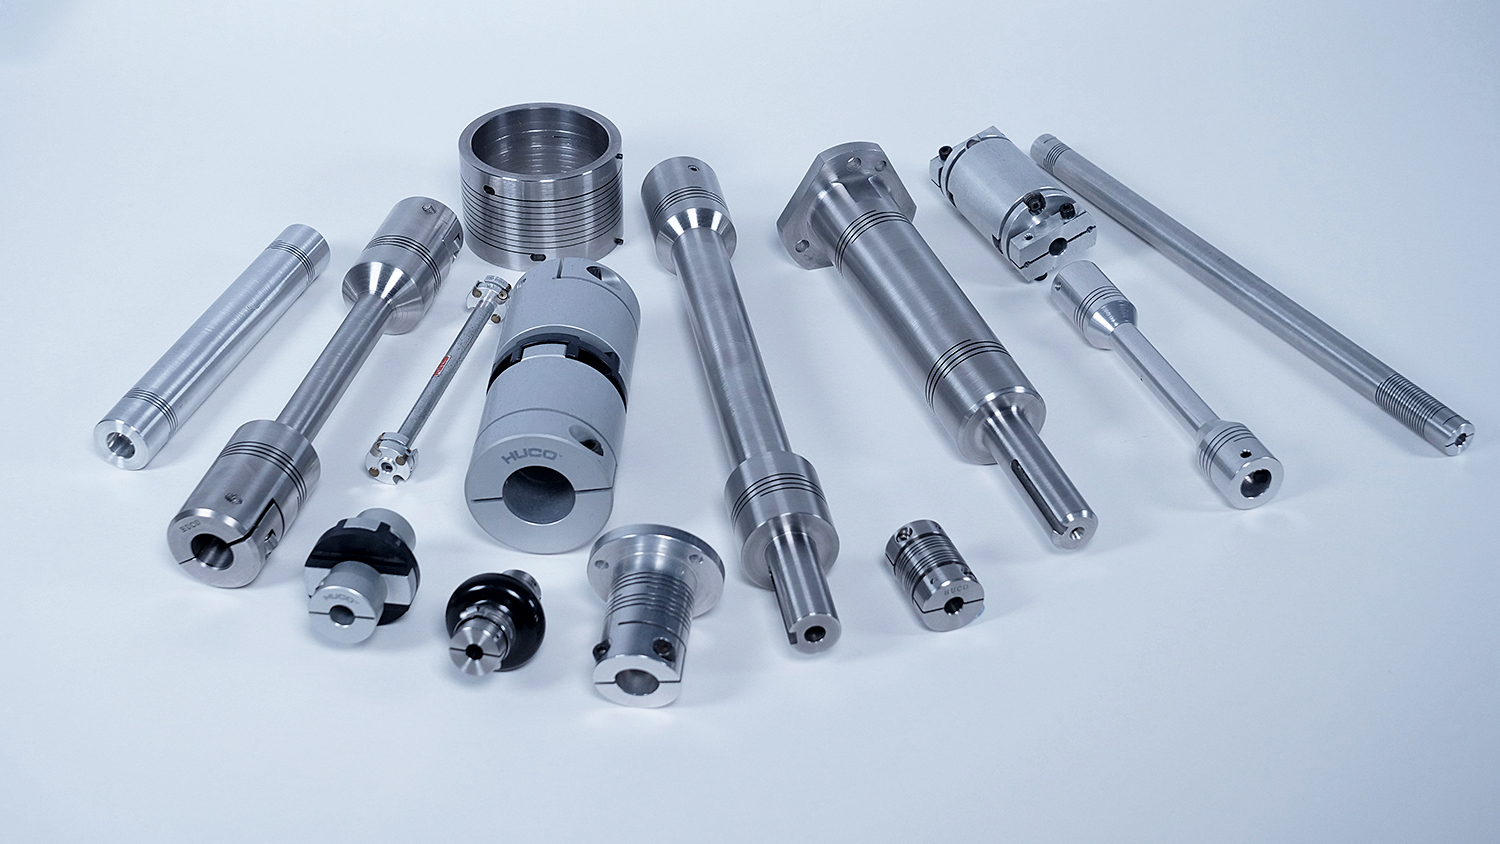 The Huco catalogue is made up of a series of different coupling styles, each one designed to accommodate varying degrees of misalignment and perform to different levels of precision.